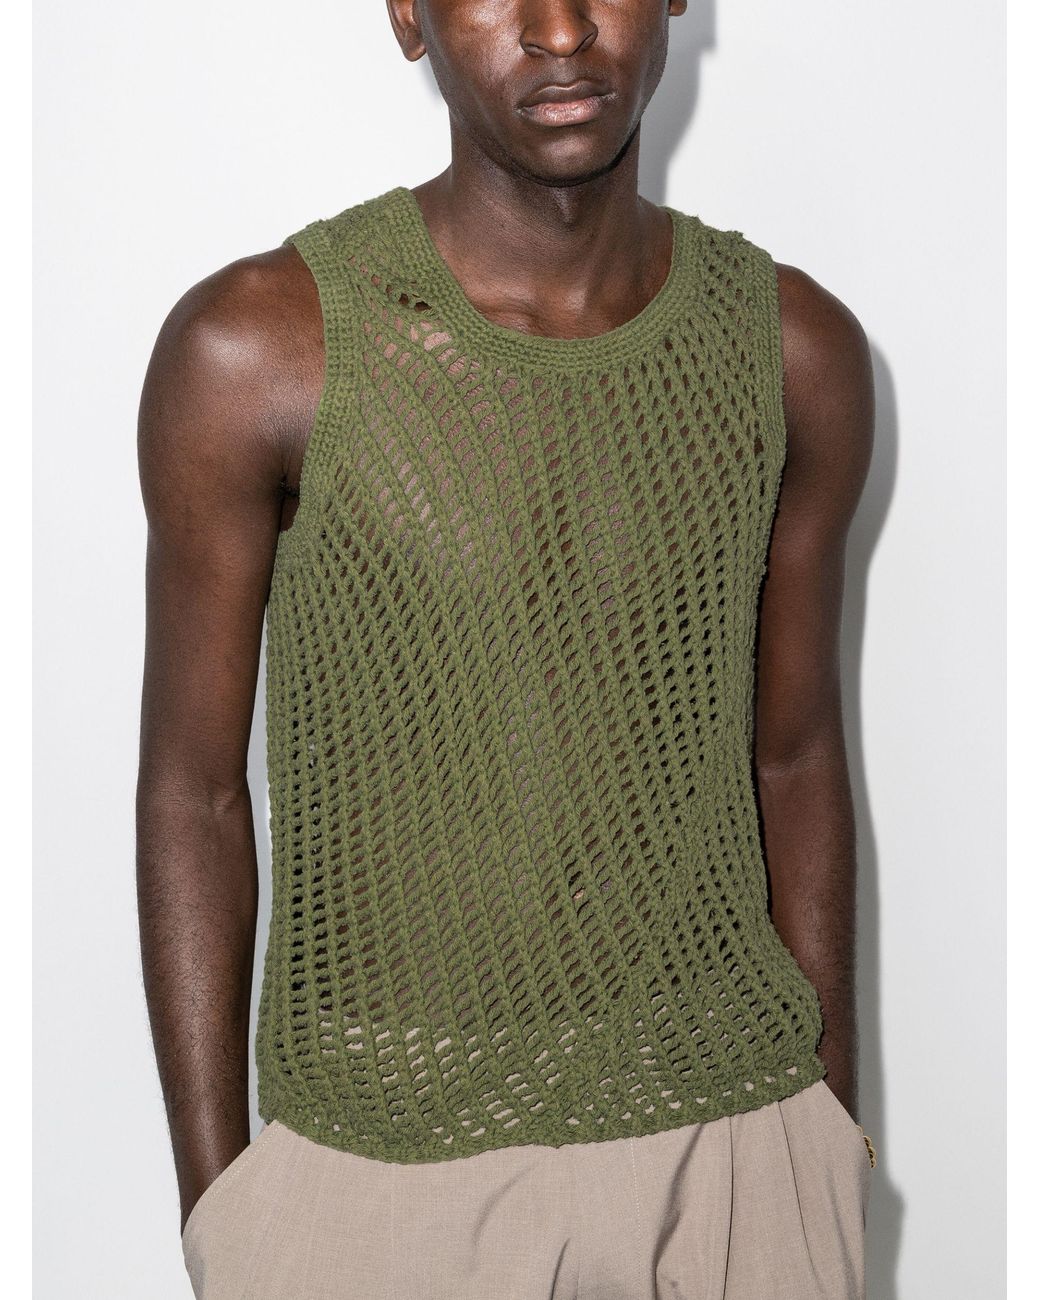 Nicholas Daley Knitted String Vest Top in Green for Men | Lyst UK